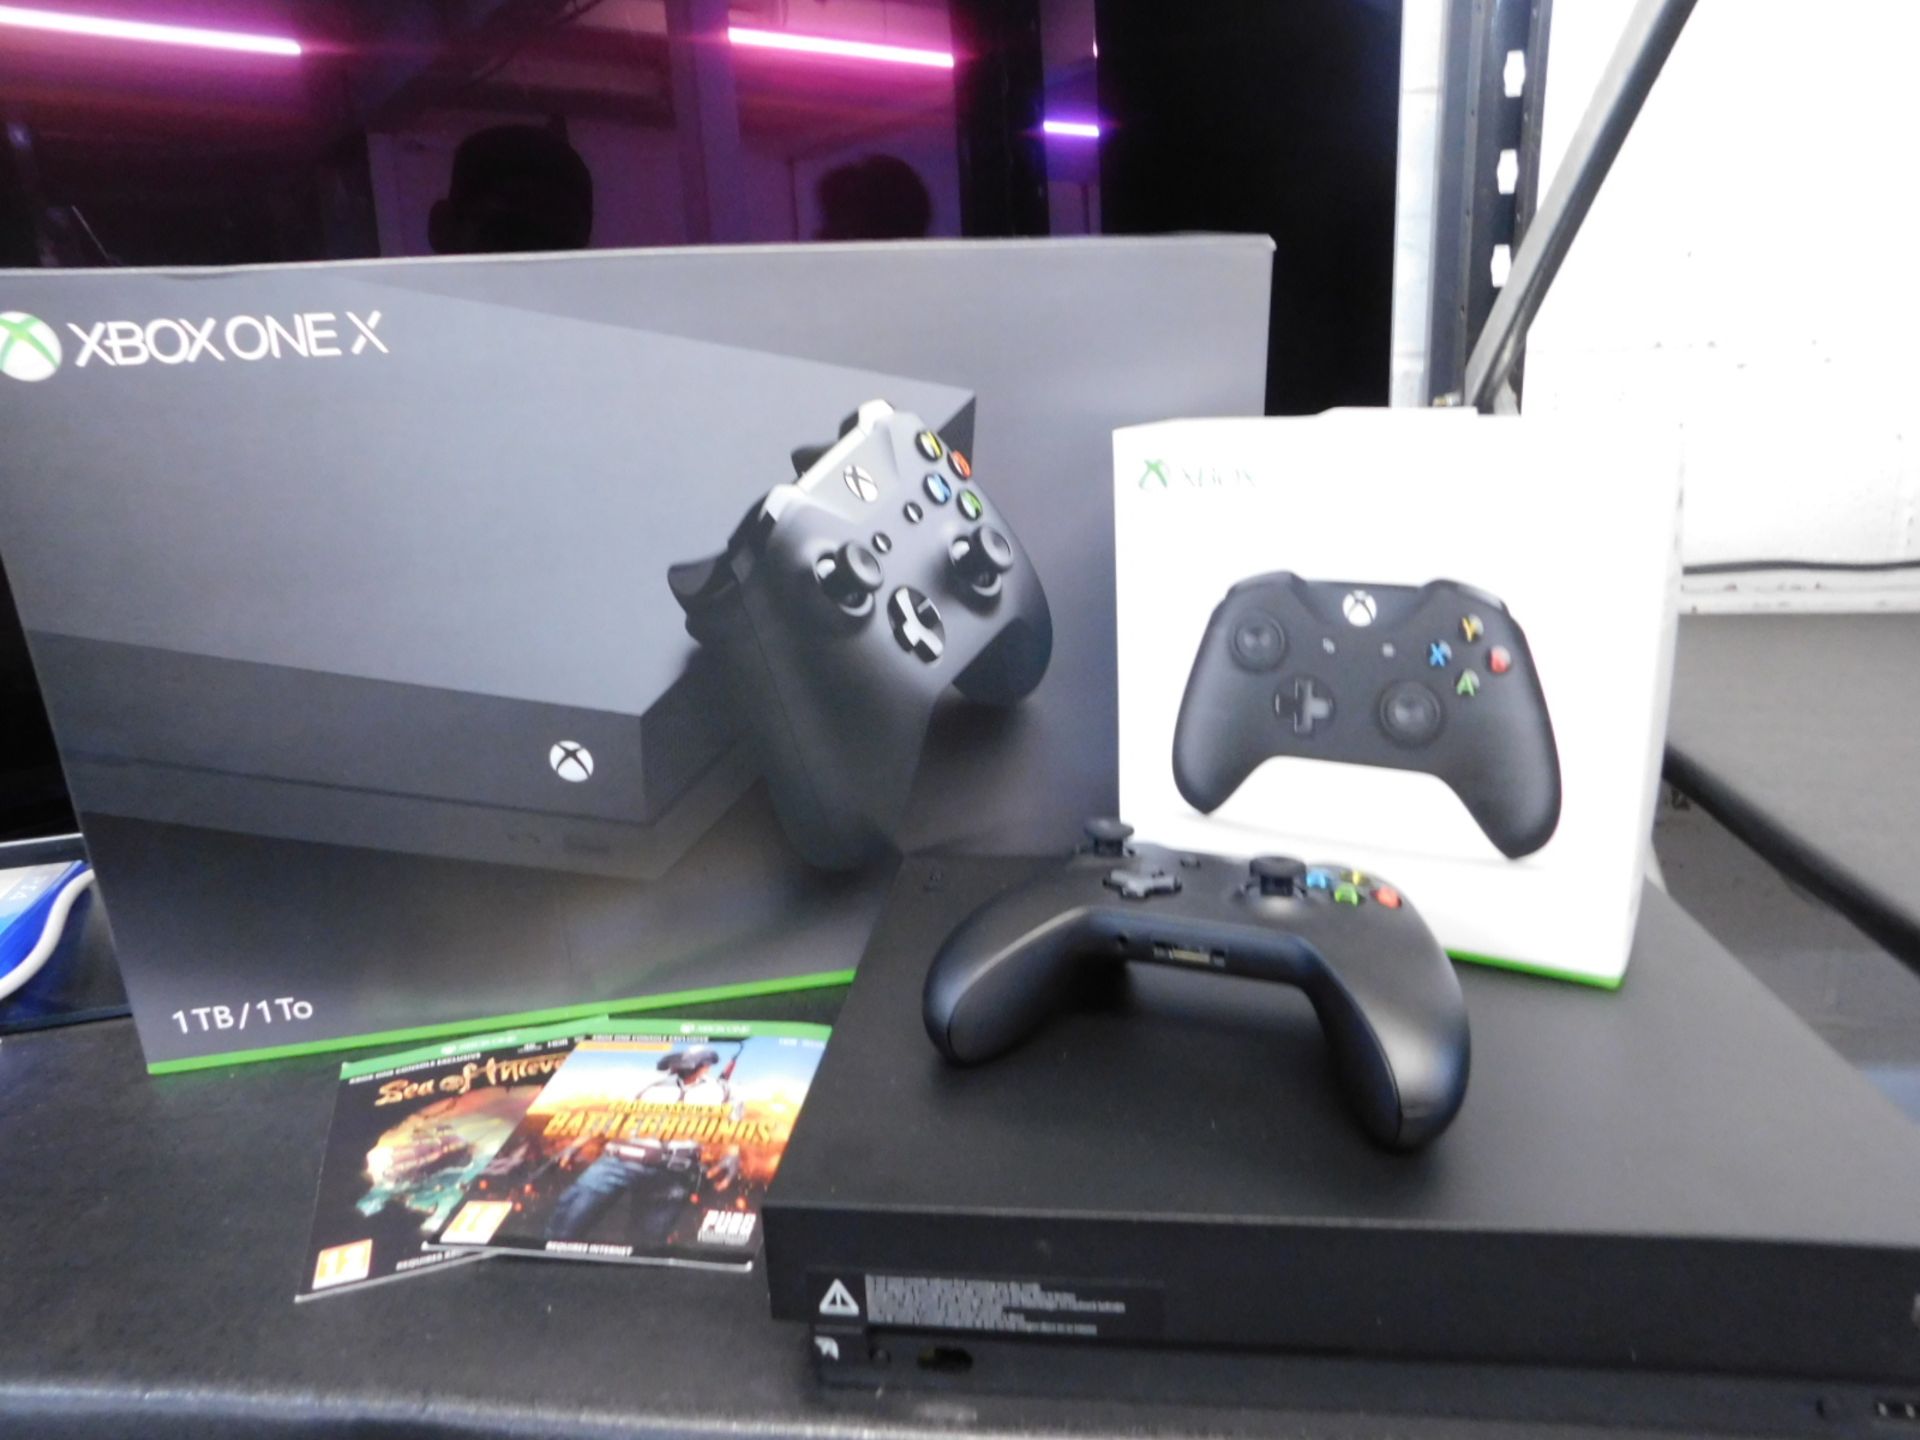 1 BOXED XBOX ONE X 1TB CONSOLE COMPLETE WITH 2 CONTROLLERS AND 2 GAMES RRP £499 (WORKING, IN